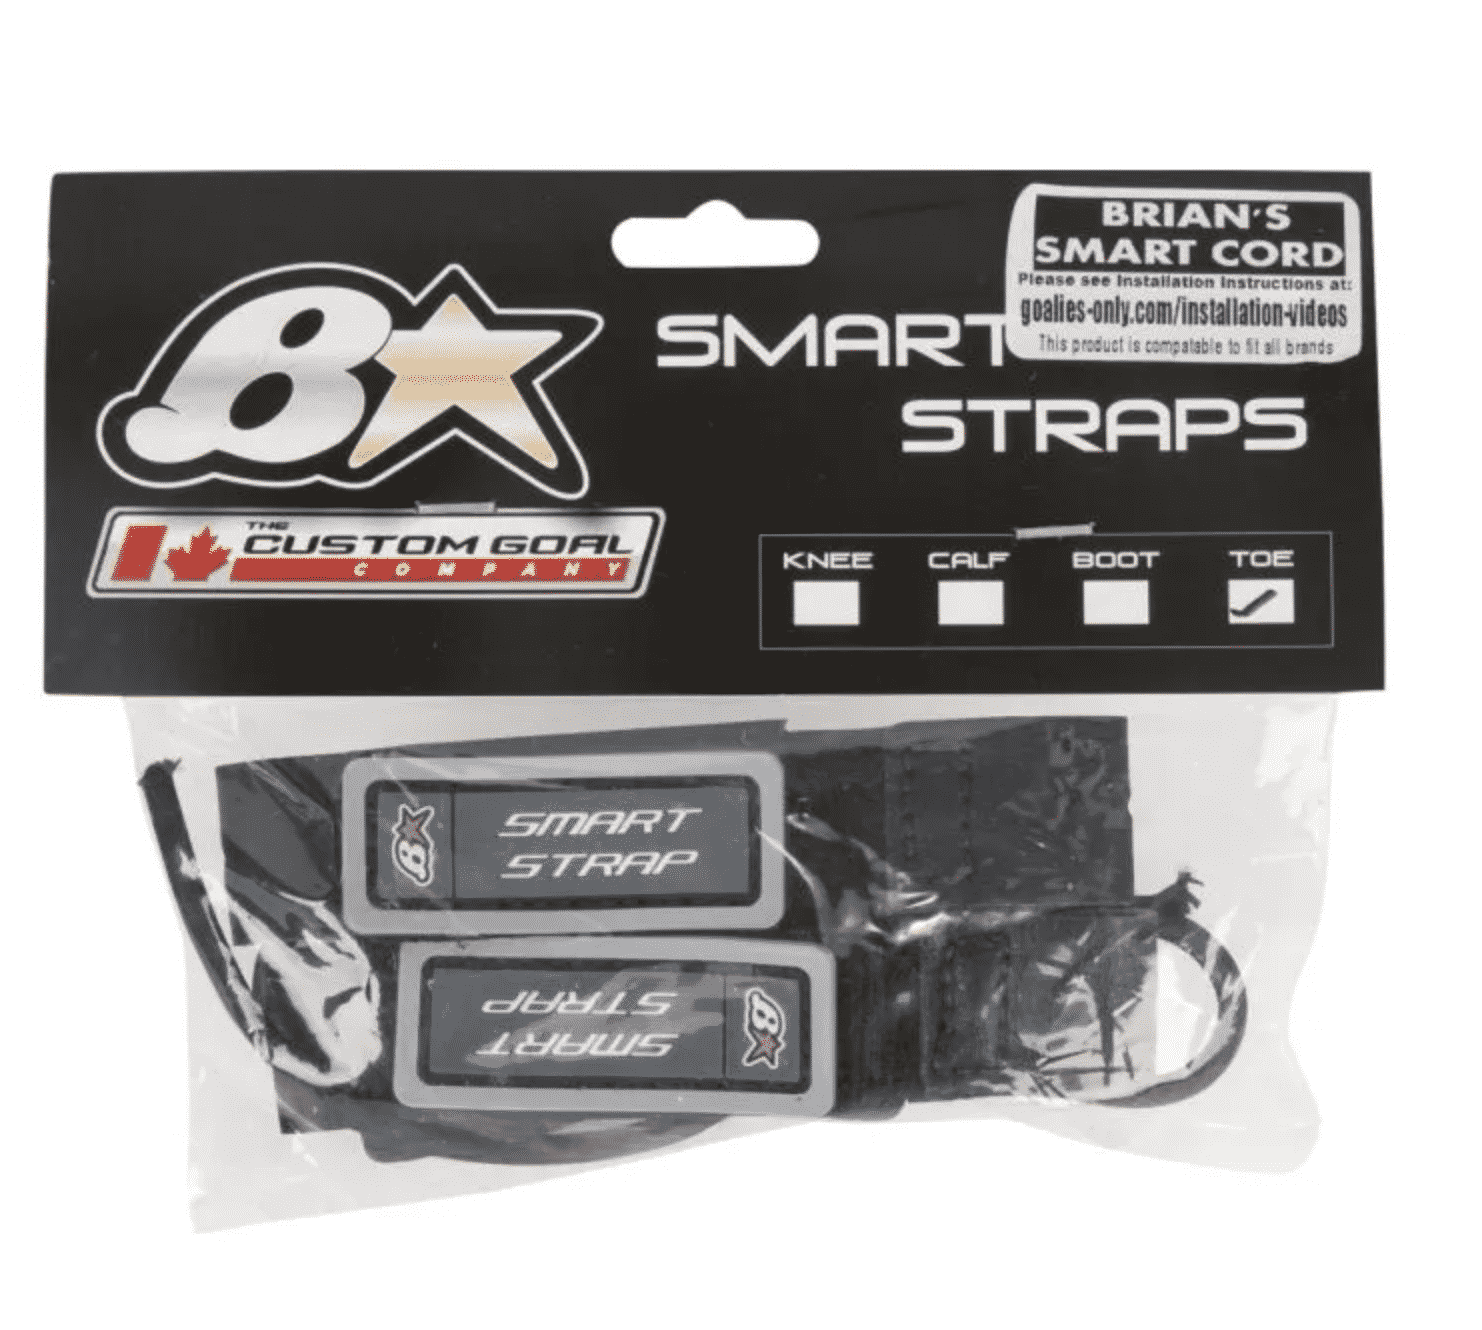 Brian's Smart Strap System